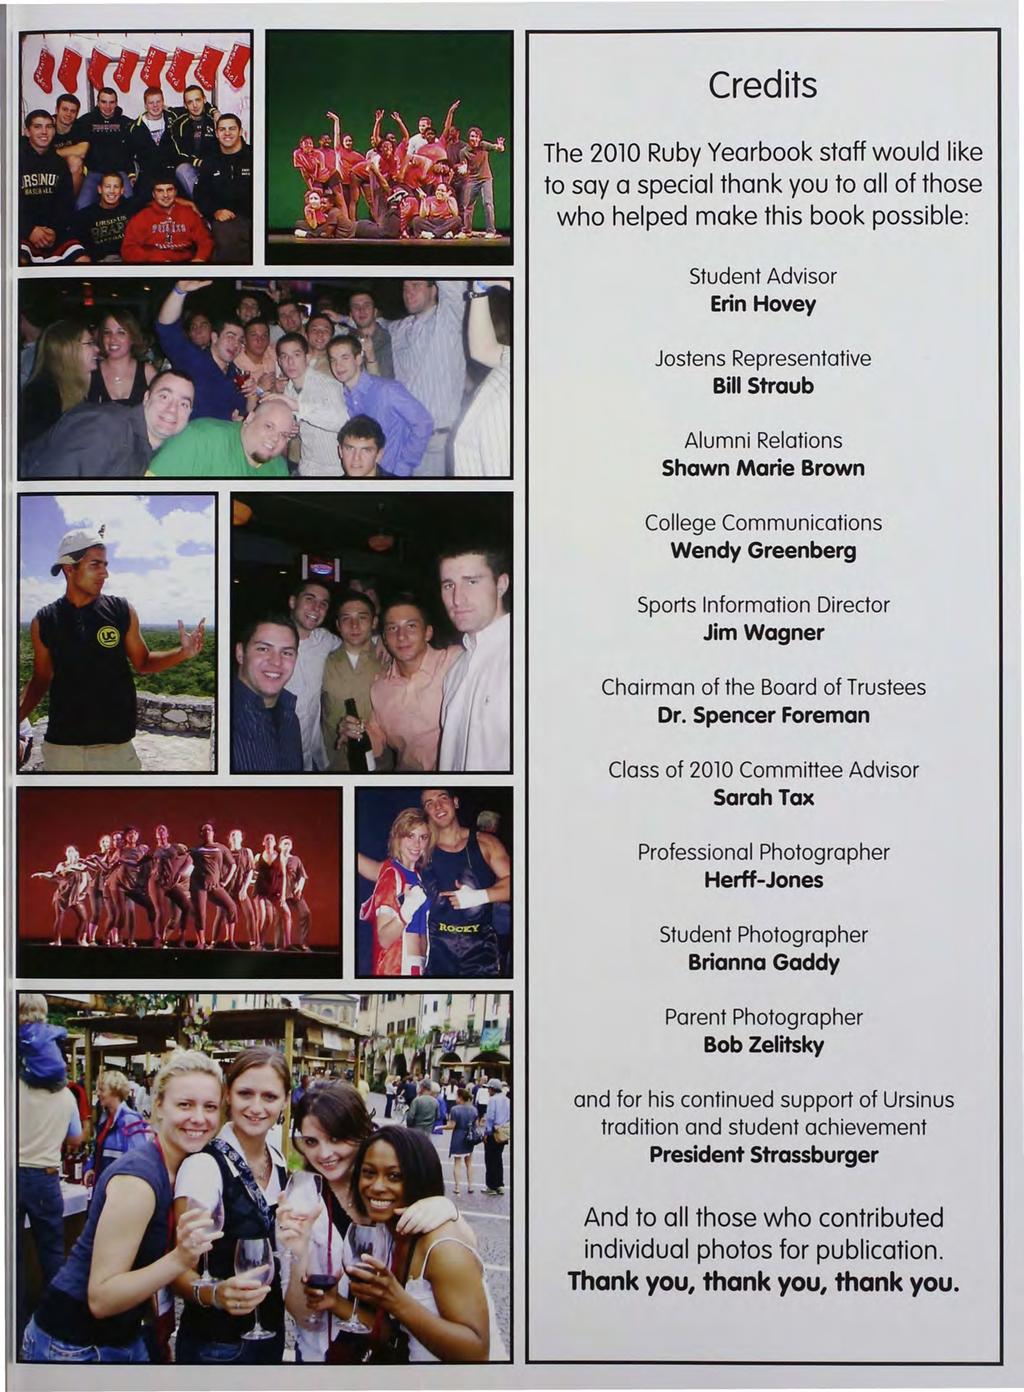 Credits The 2010 Ruby Yearbook staff would like to soya special thank you to all of those who helped make this book possible: Student Advisor Erin Hovey Jostens Representative Bill Straub Alumni